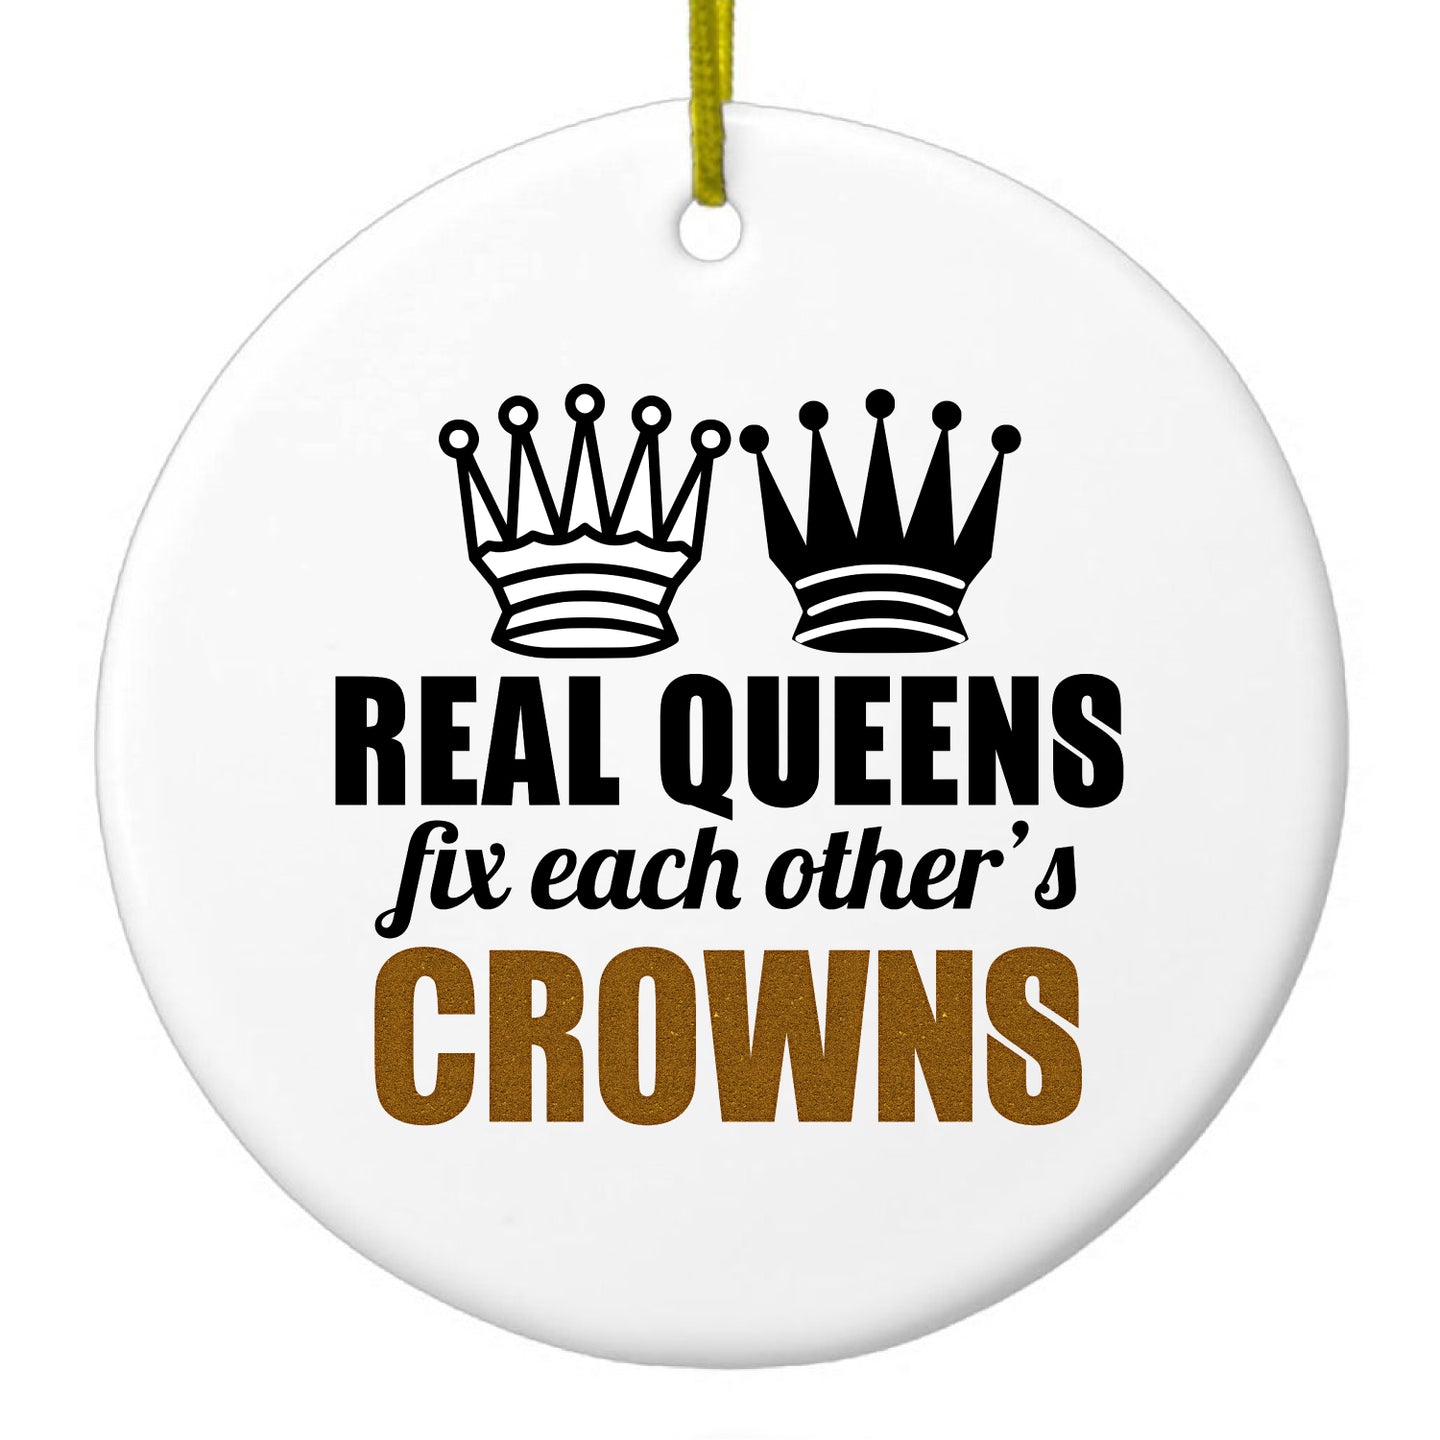 DistinctInk® Hanging Ceramic Christmas Tree Ornament with Gold String - Great Gift / Present - 2 3/4 inch Diameter - Real Queens Fix Each Other's Crowns